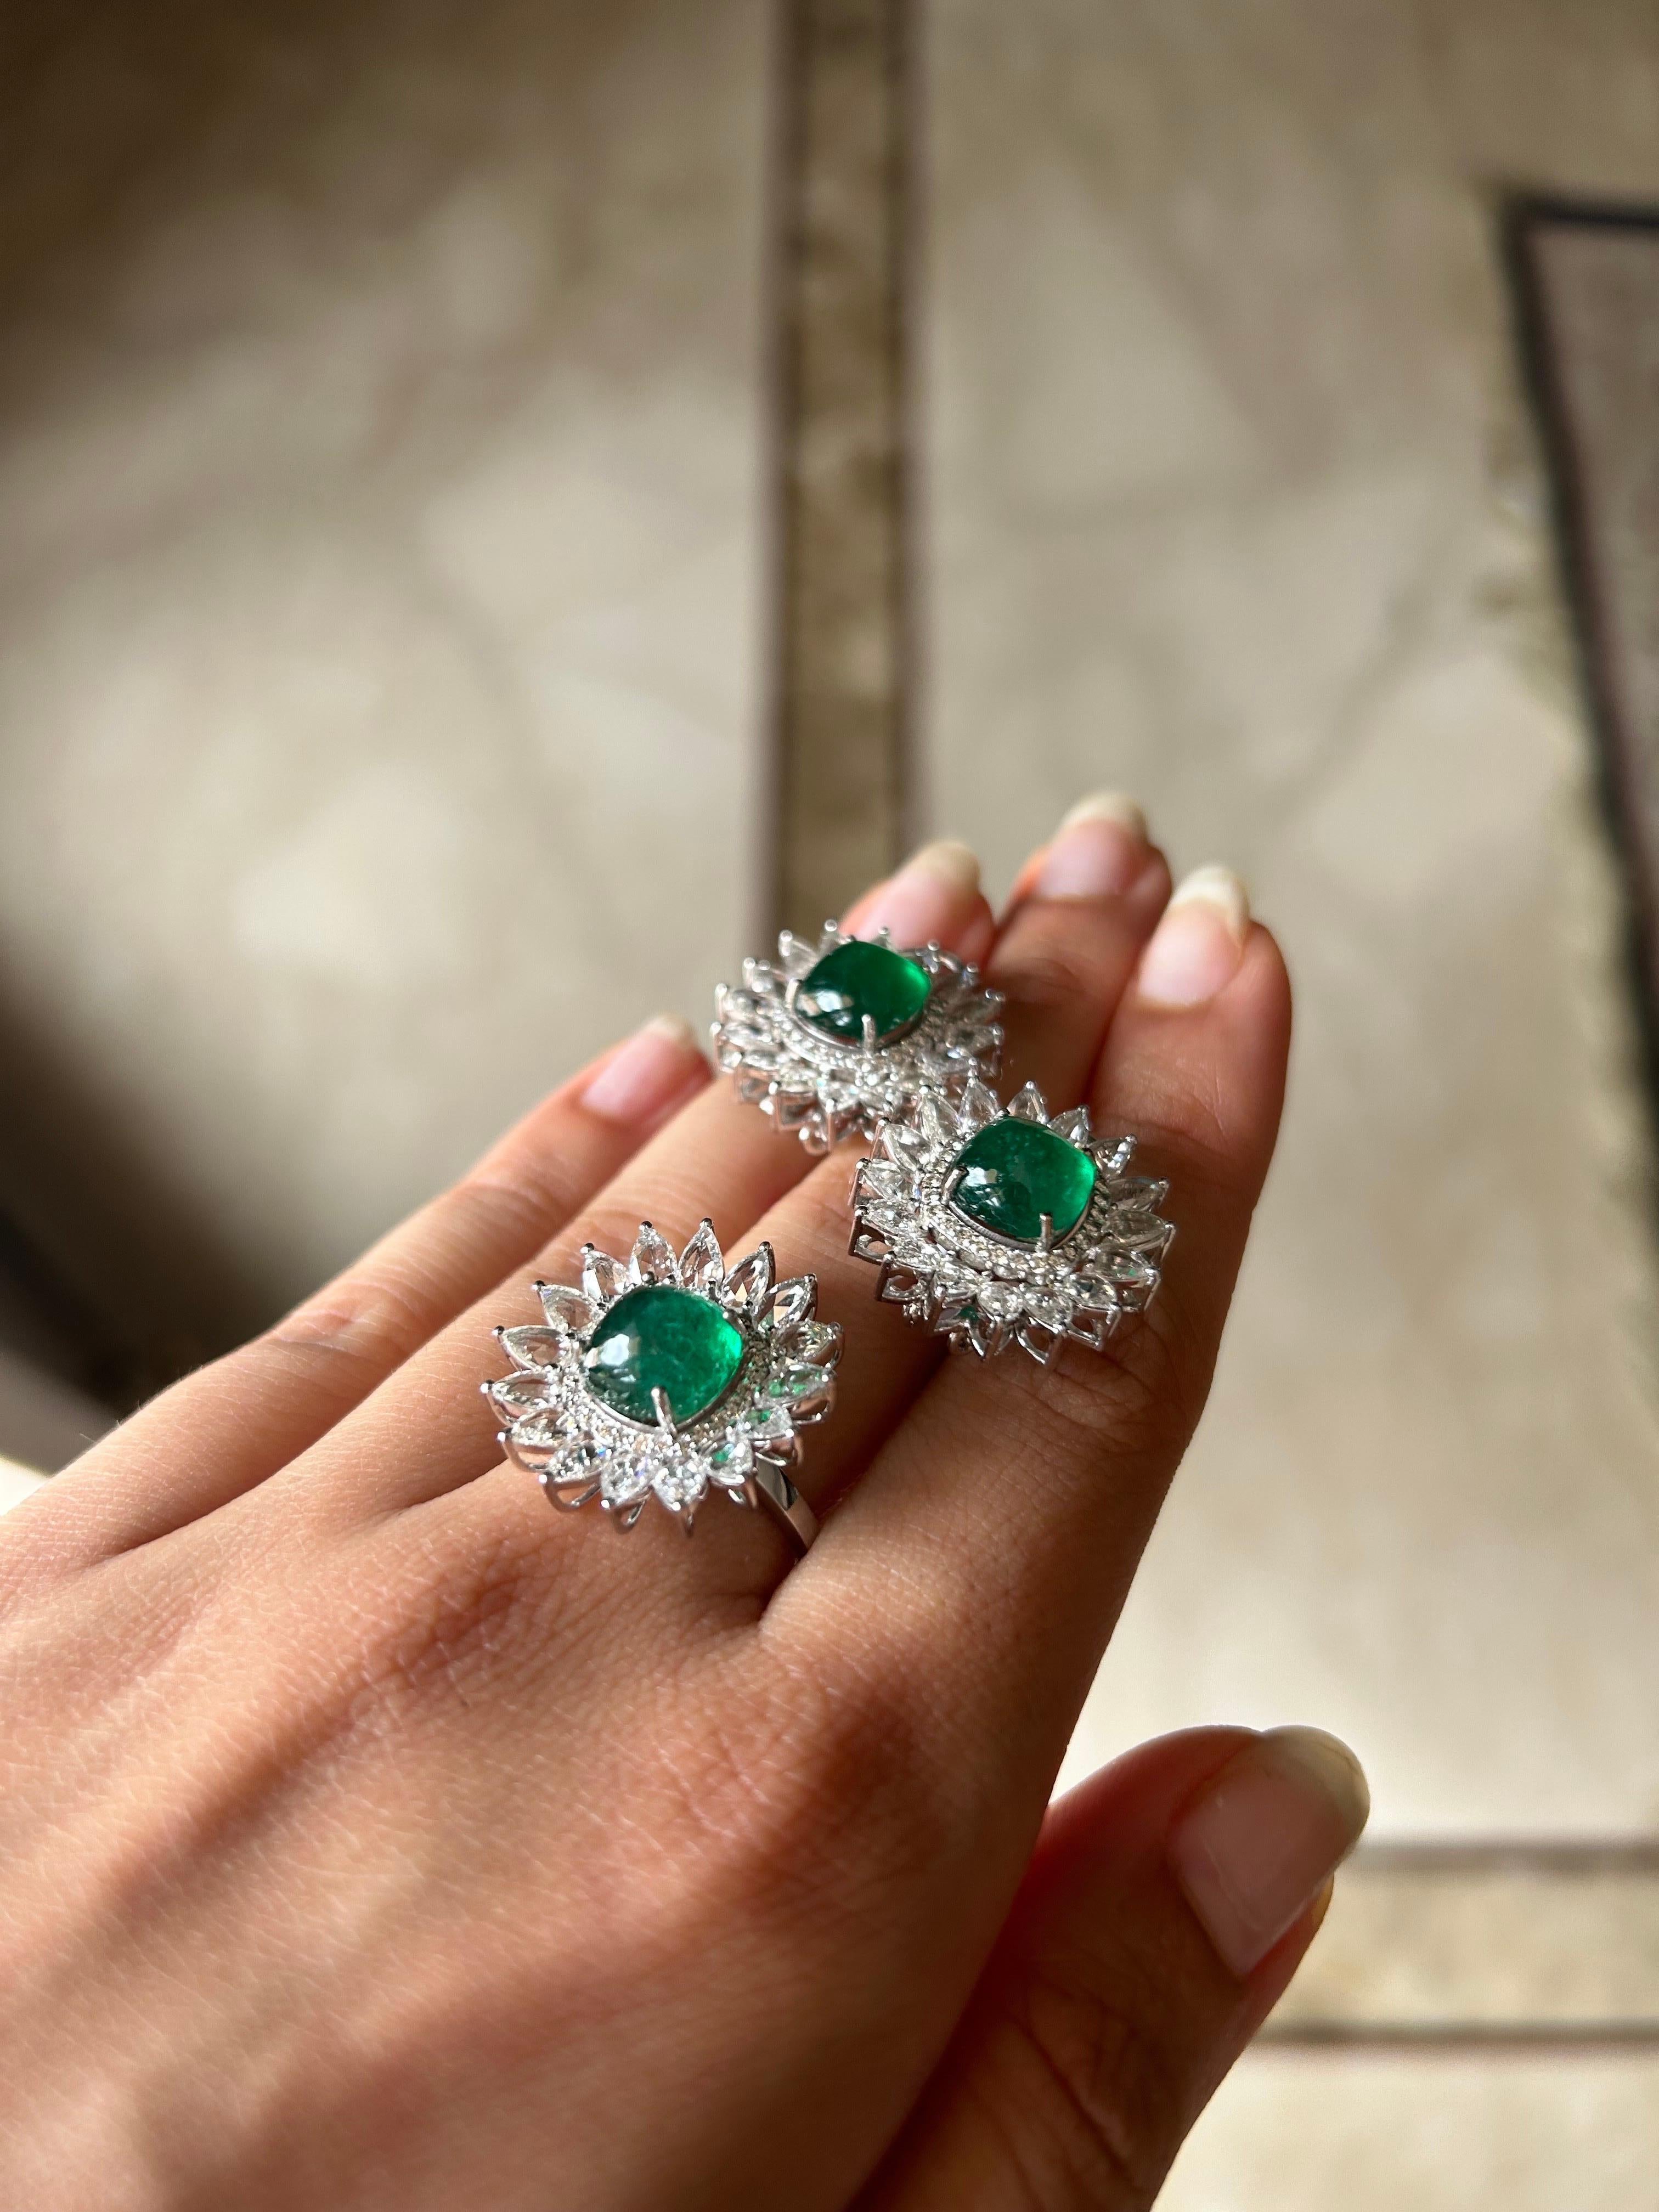 A unique pair of earrings and ring set, with  transparent, beautiful vivid green color natural sugarloaf Zambian Emeralds and White Diamonds. 
The earrings have a total of 3.71 carats Diamond and 6.97 carat Emeralds. The ring has a total of 1.9